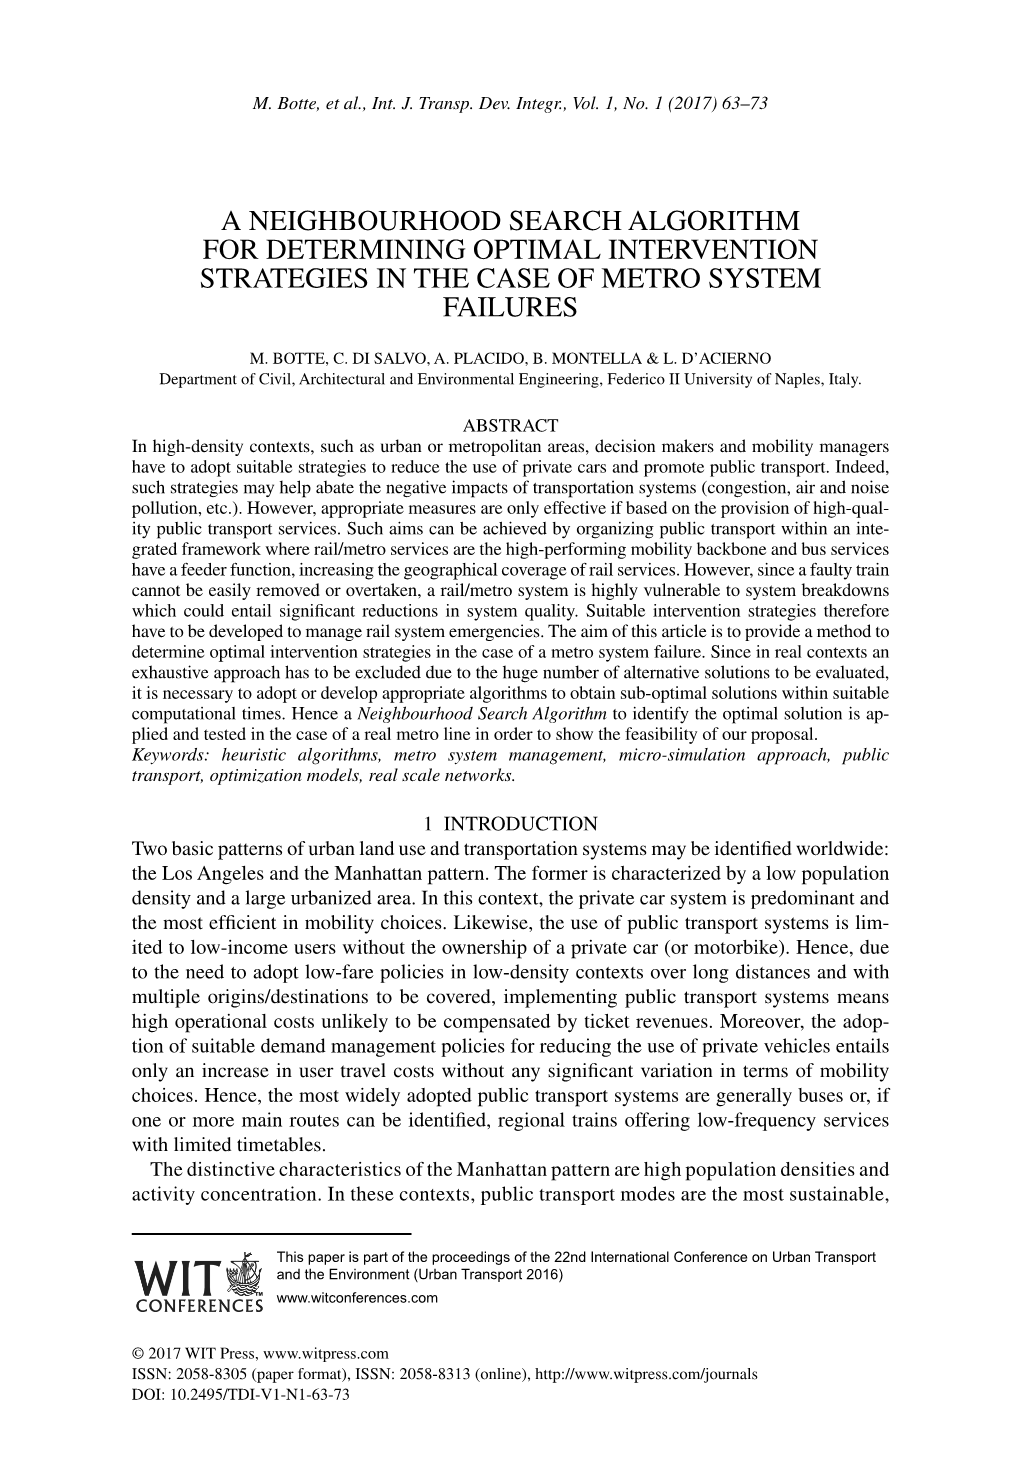 A Neighbourhood Search Algorithm for Determining Optimal Intervention Strategies in the Case of Metro System Failures